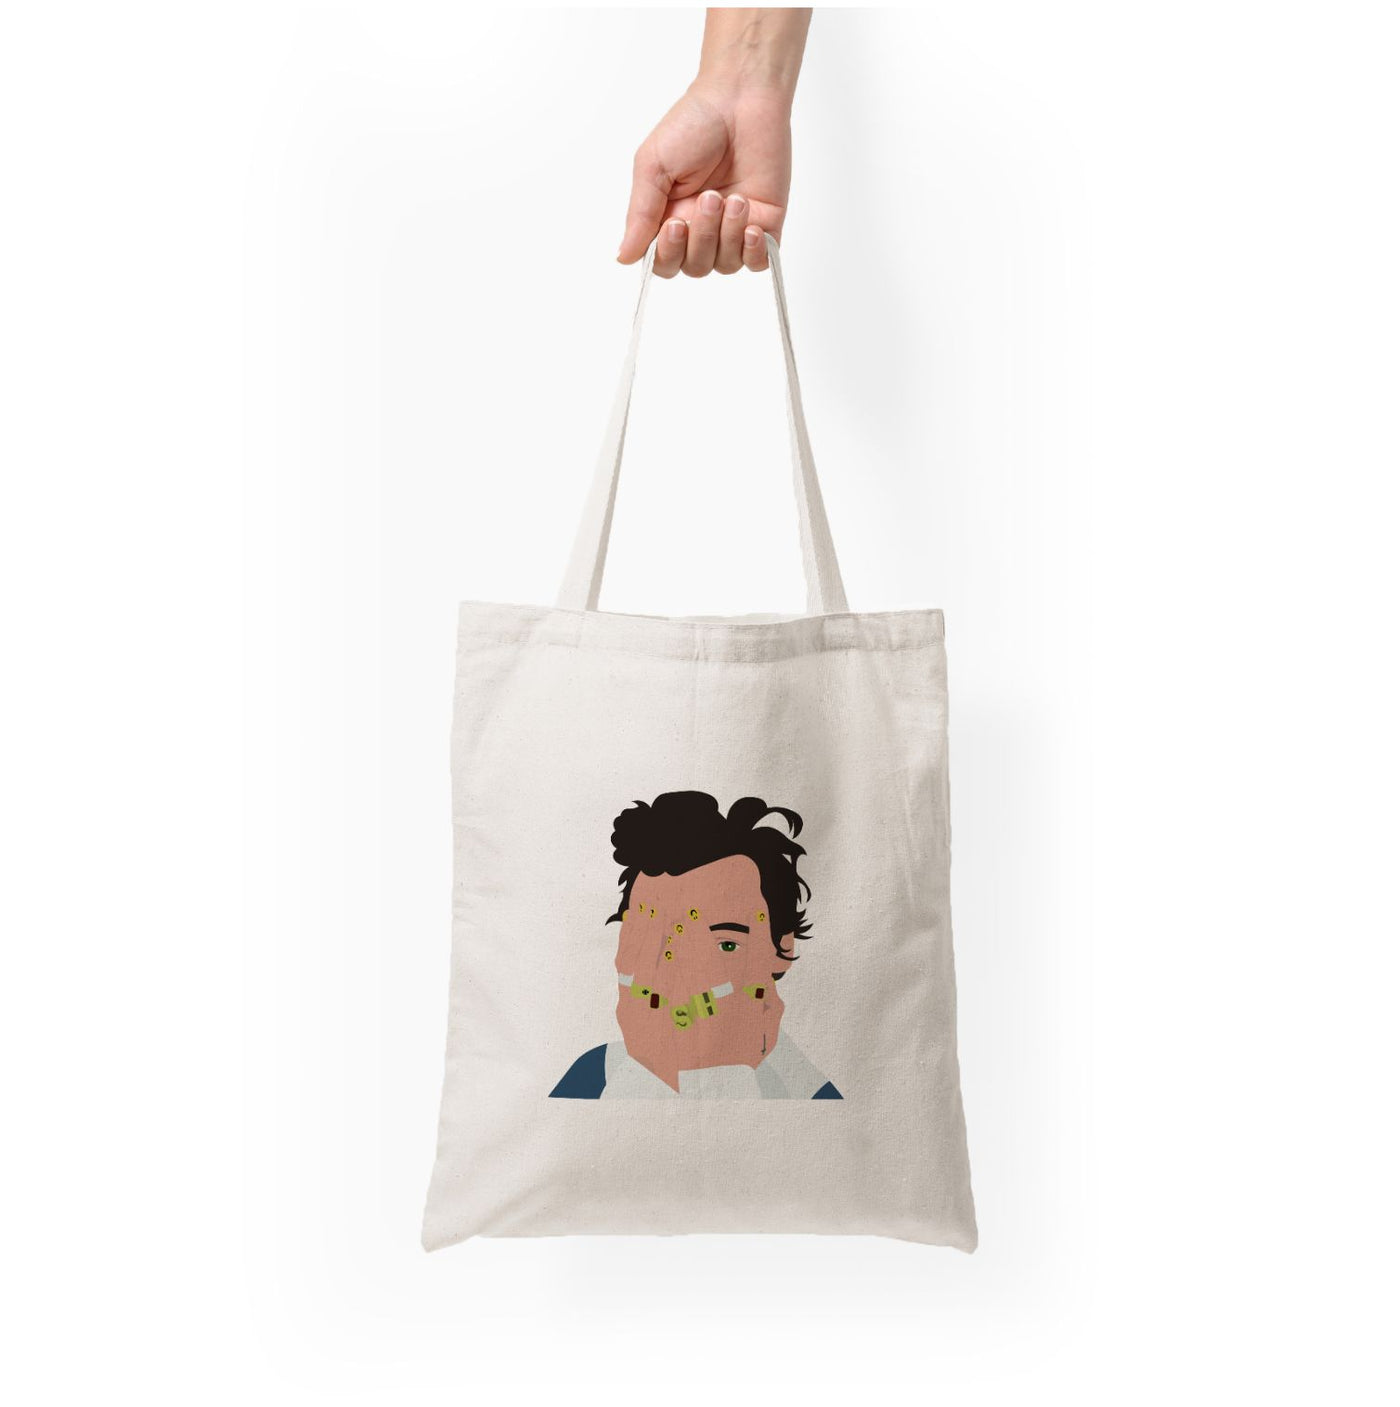 Smiley - Harry Tote Bag